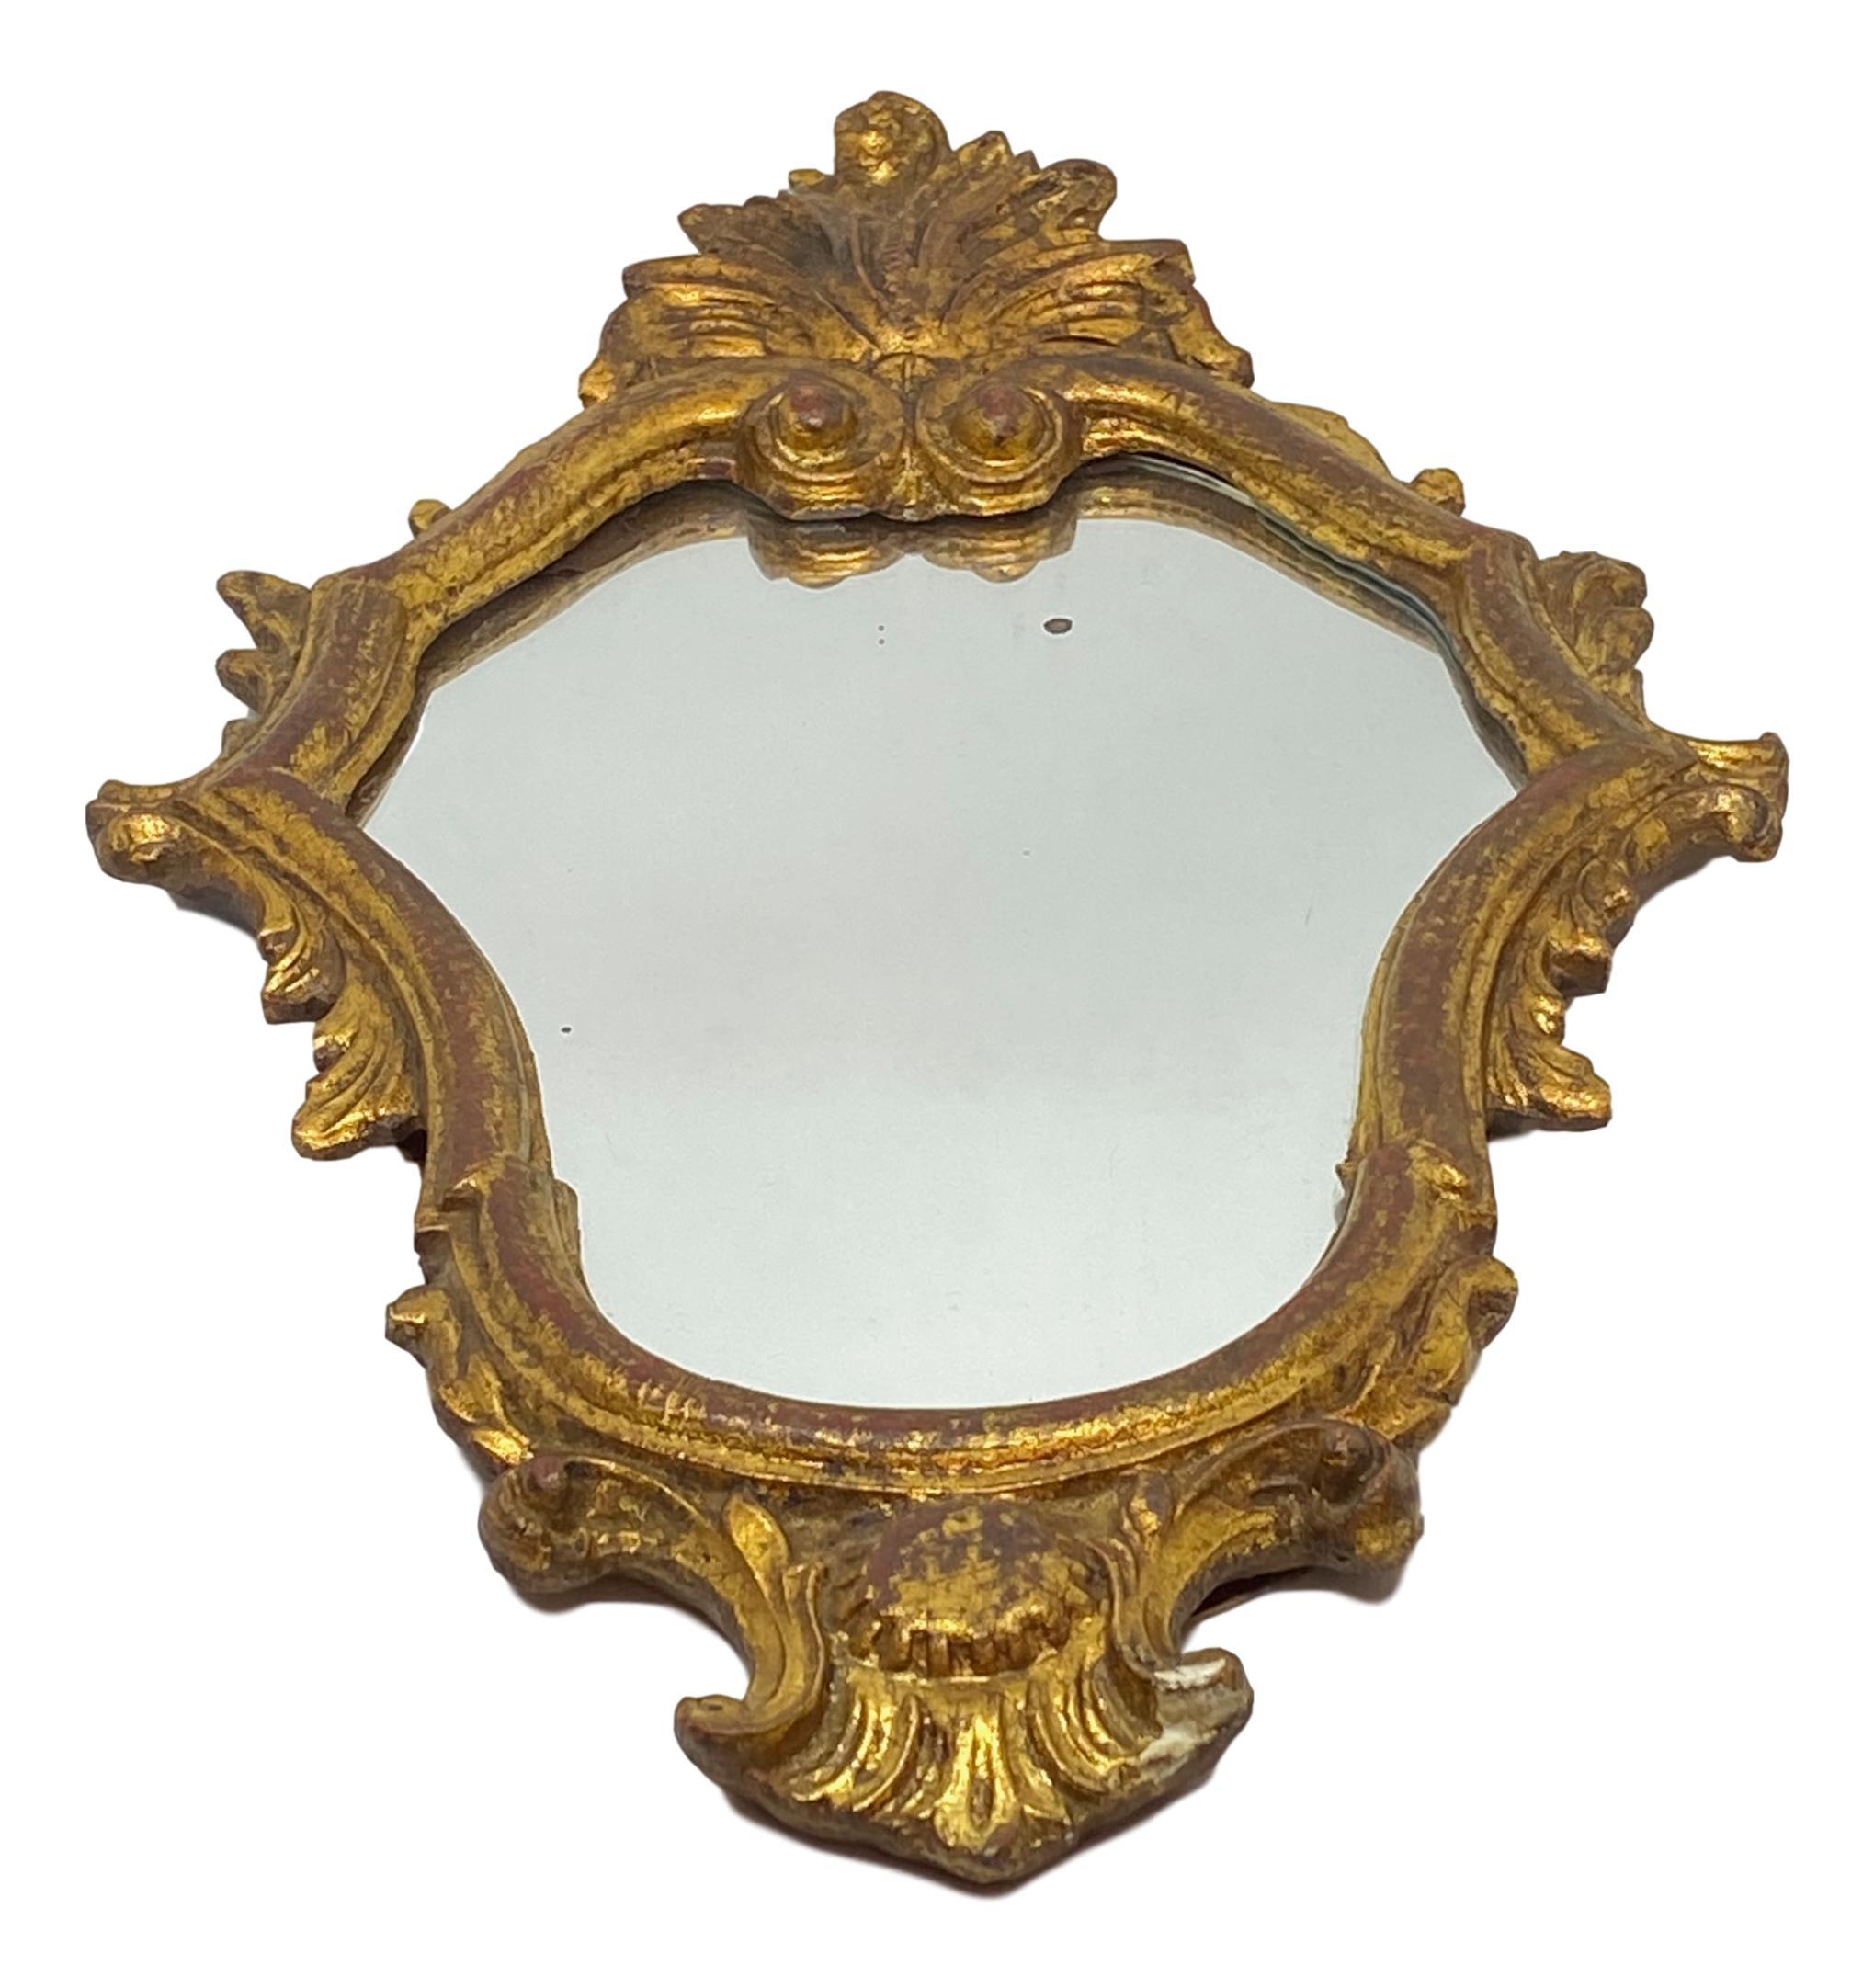 Stunning Hollywood Regency style toleware mirror. The gilt frame surrounds a glass mirror. Made in Italy, circa 1960s. Beautiful small mirror for any room. Mirror with some age and blind or distressed parts. Nice addition to any room.